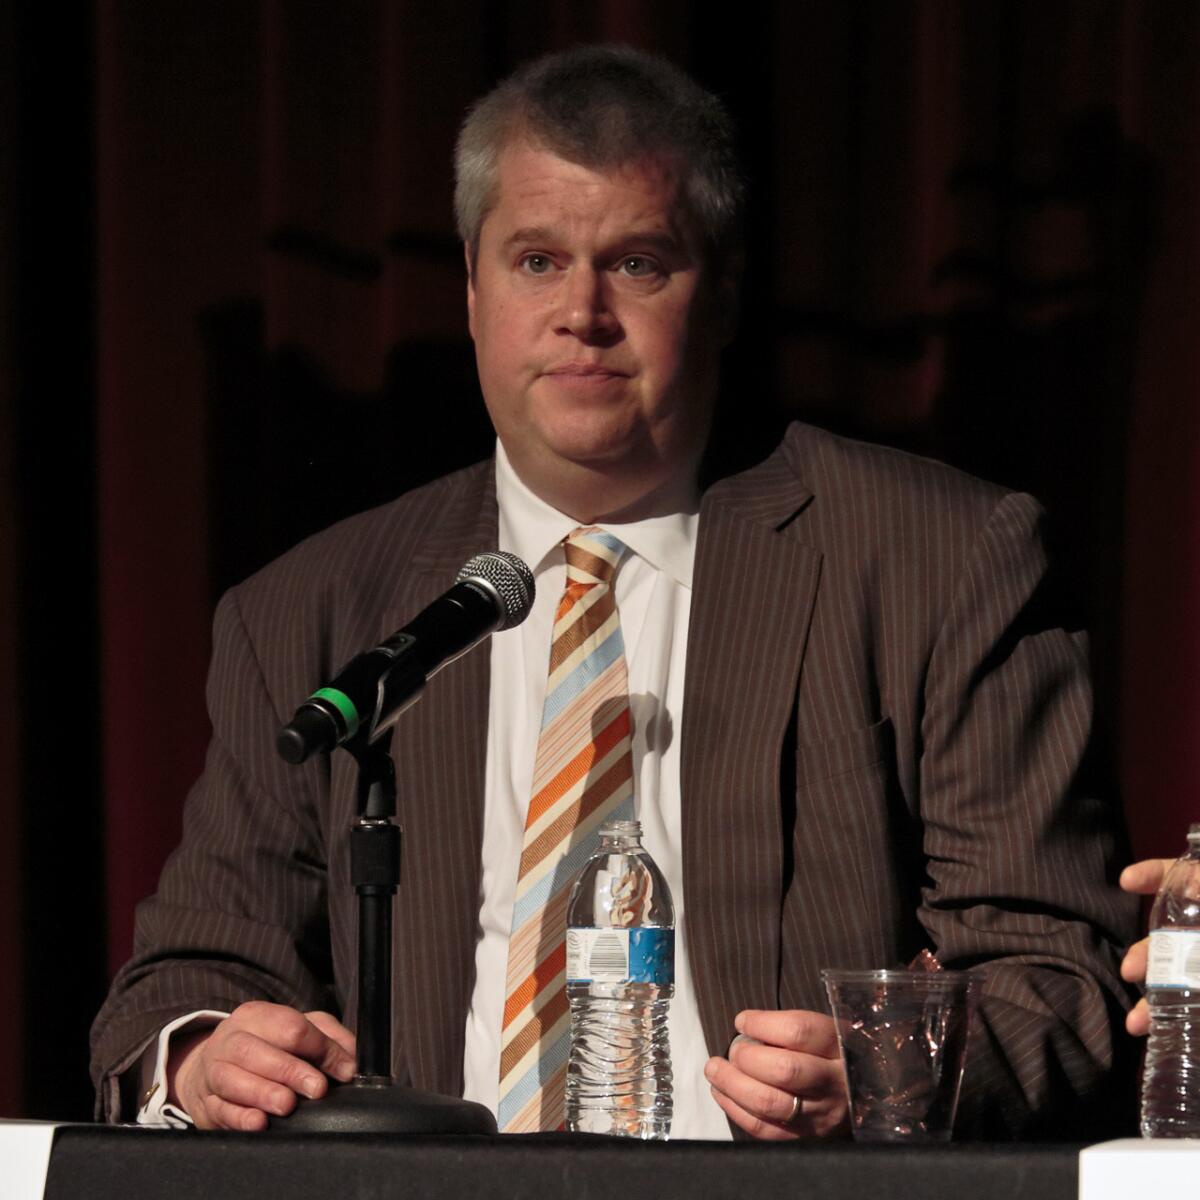 "Never live your life in such a way that you have to regret anything," Daniel Handler, a.k.a. Lemony Snicket, told the audience at Sunday's Festival of Books. "That's sound."